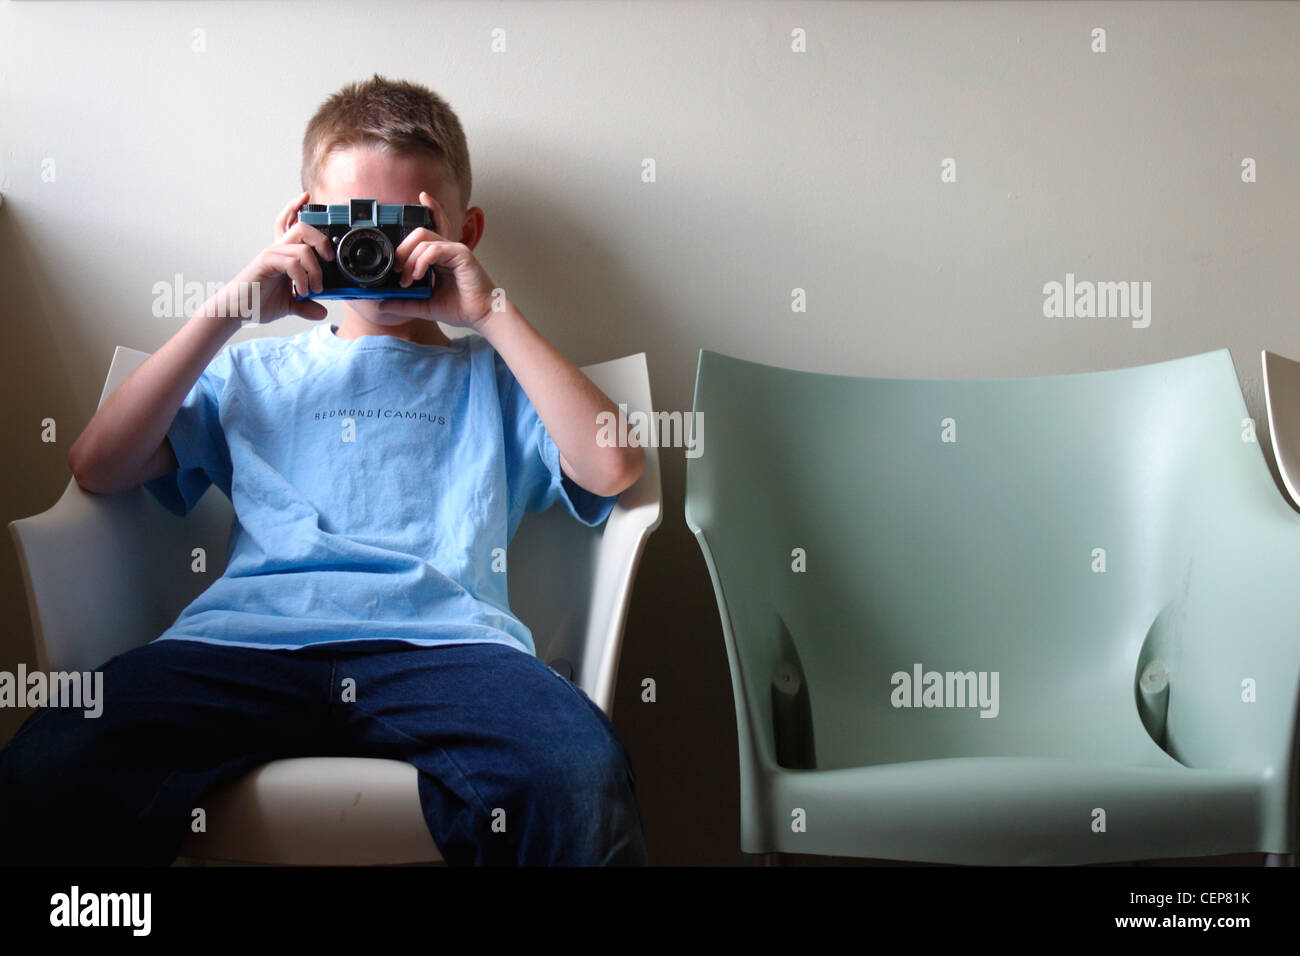 Young Boy with Camera Stock Photo